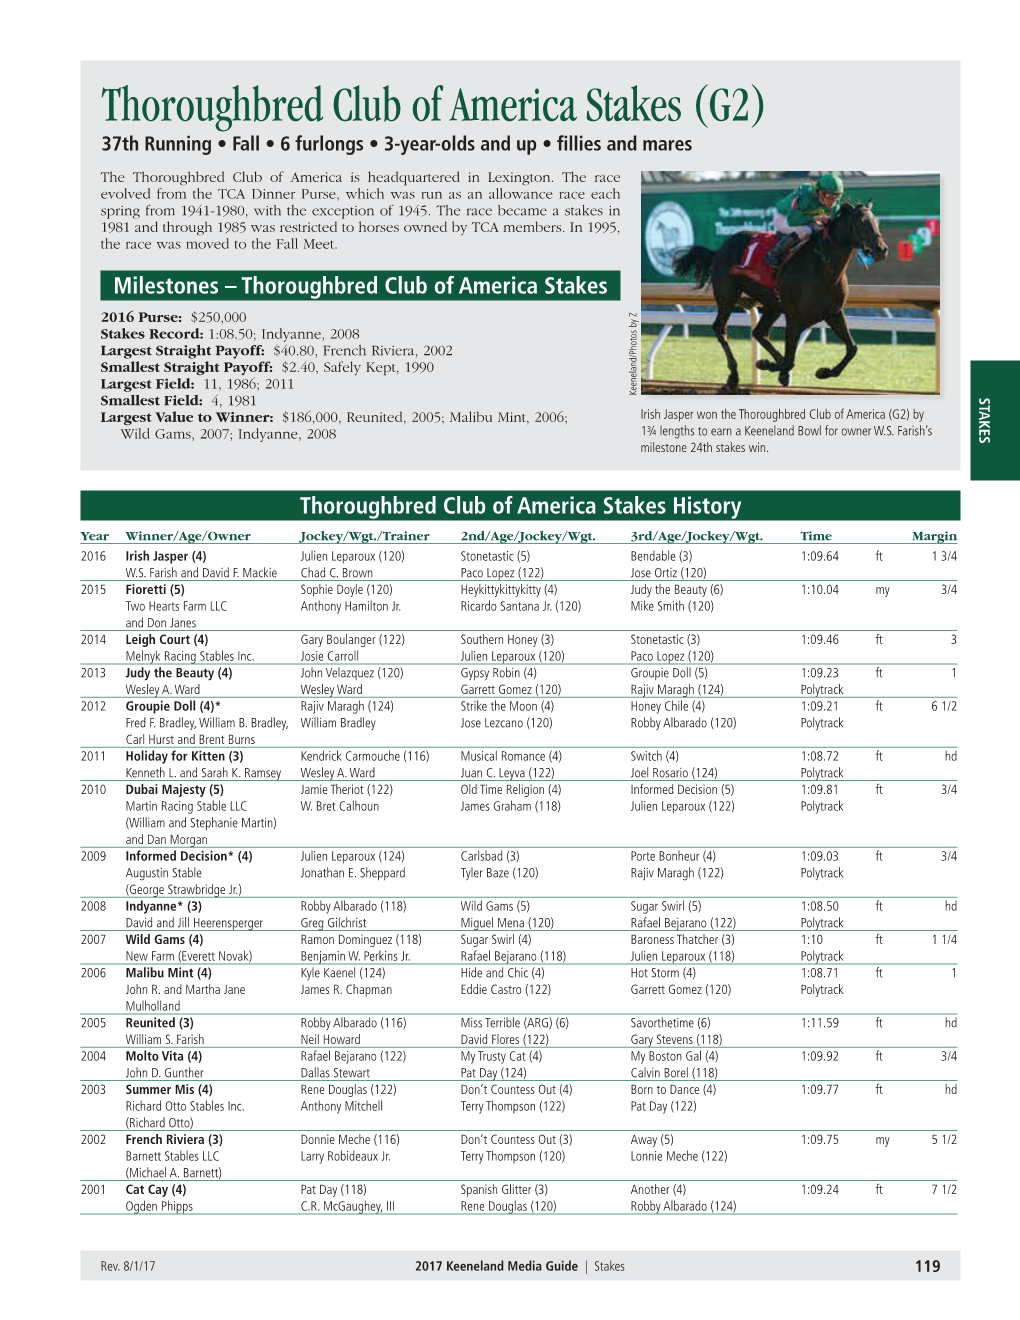 Thoroughbred Club of America Stakes (G2) 37Th Running • Fall • 6 Furlongs • 3-Year-Olds and up • Fillies and Mares